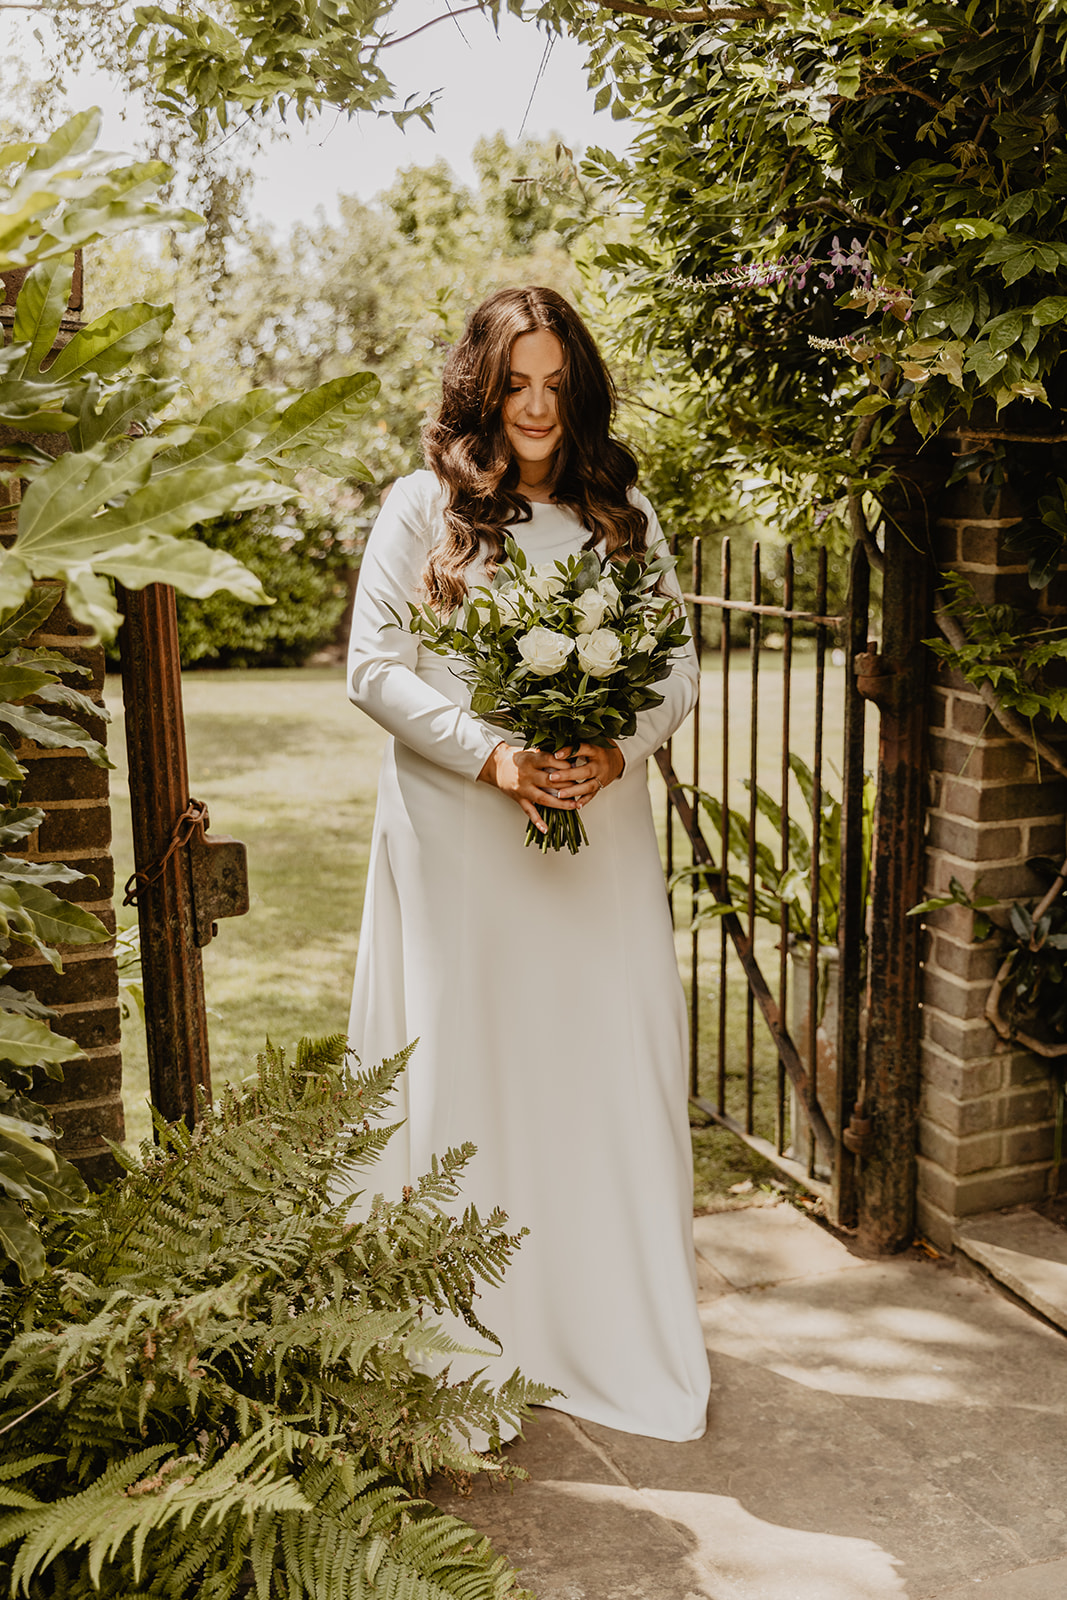 Bride at a Field Place Manor House Wedding in Worthing, Sussex. By Olive Joy Photography